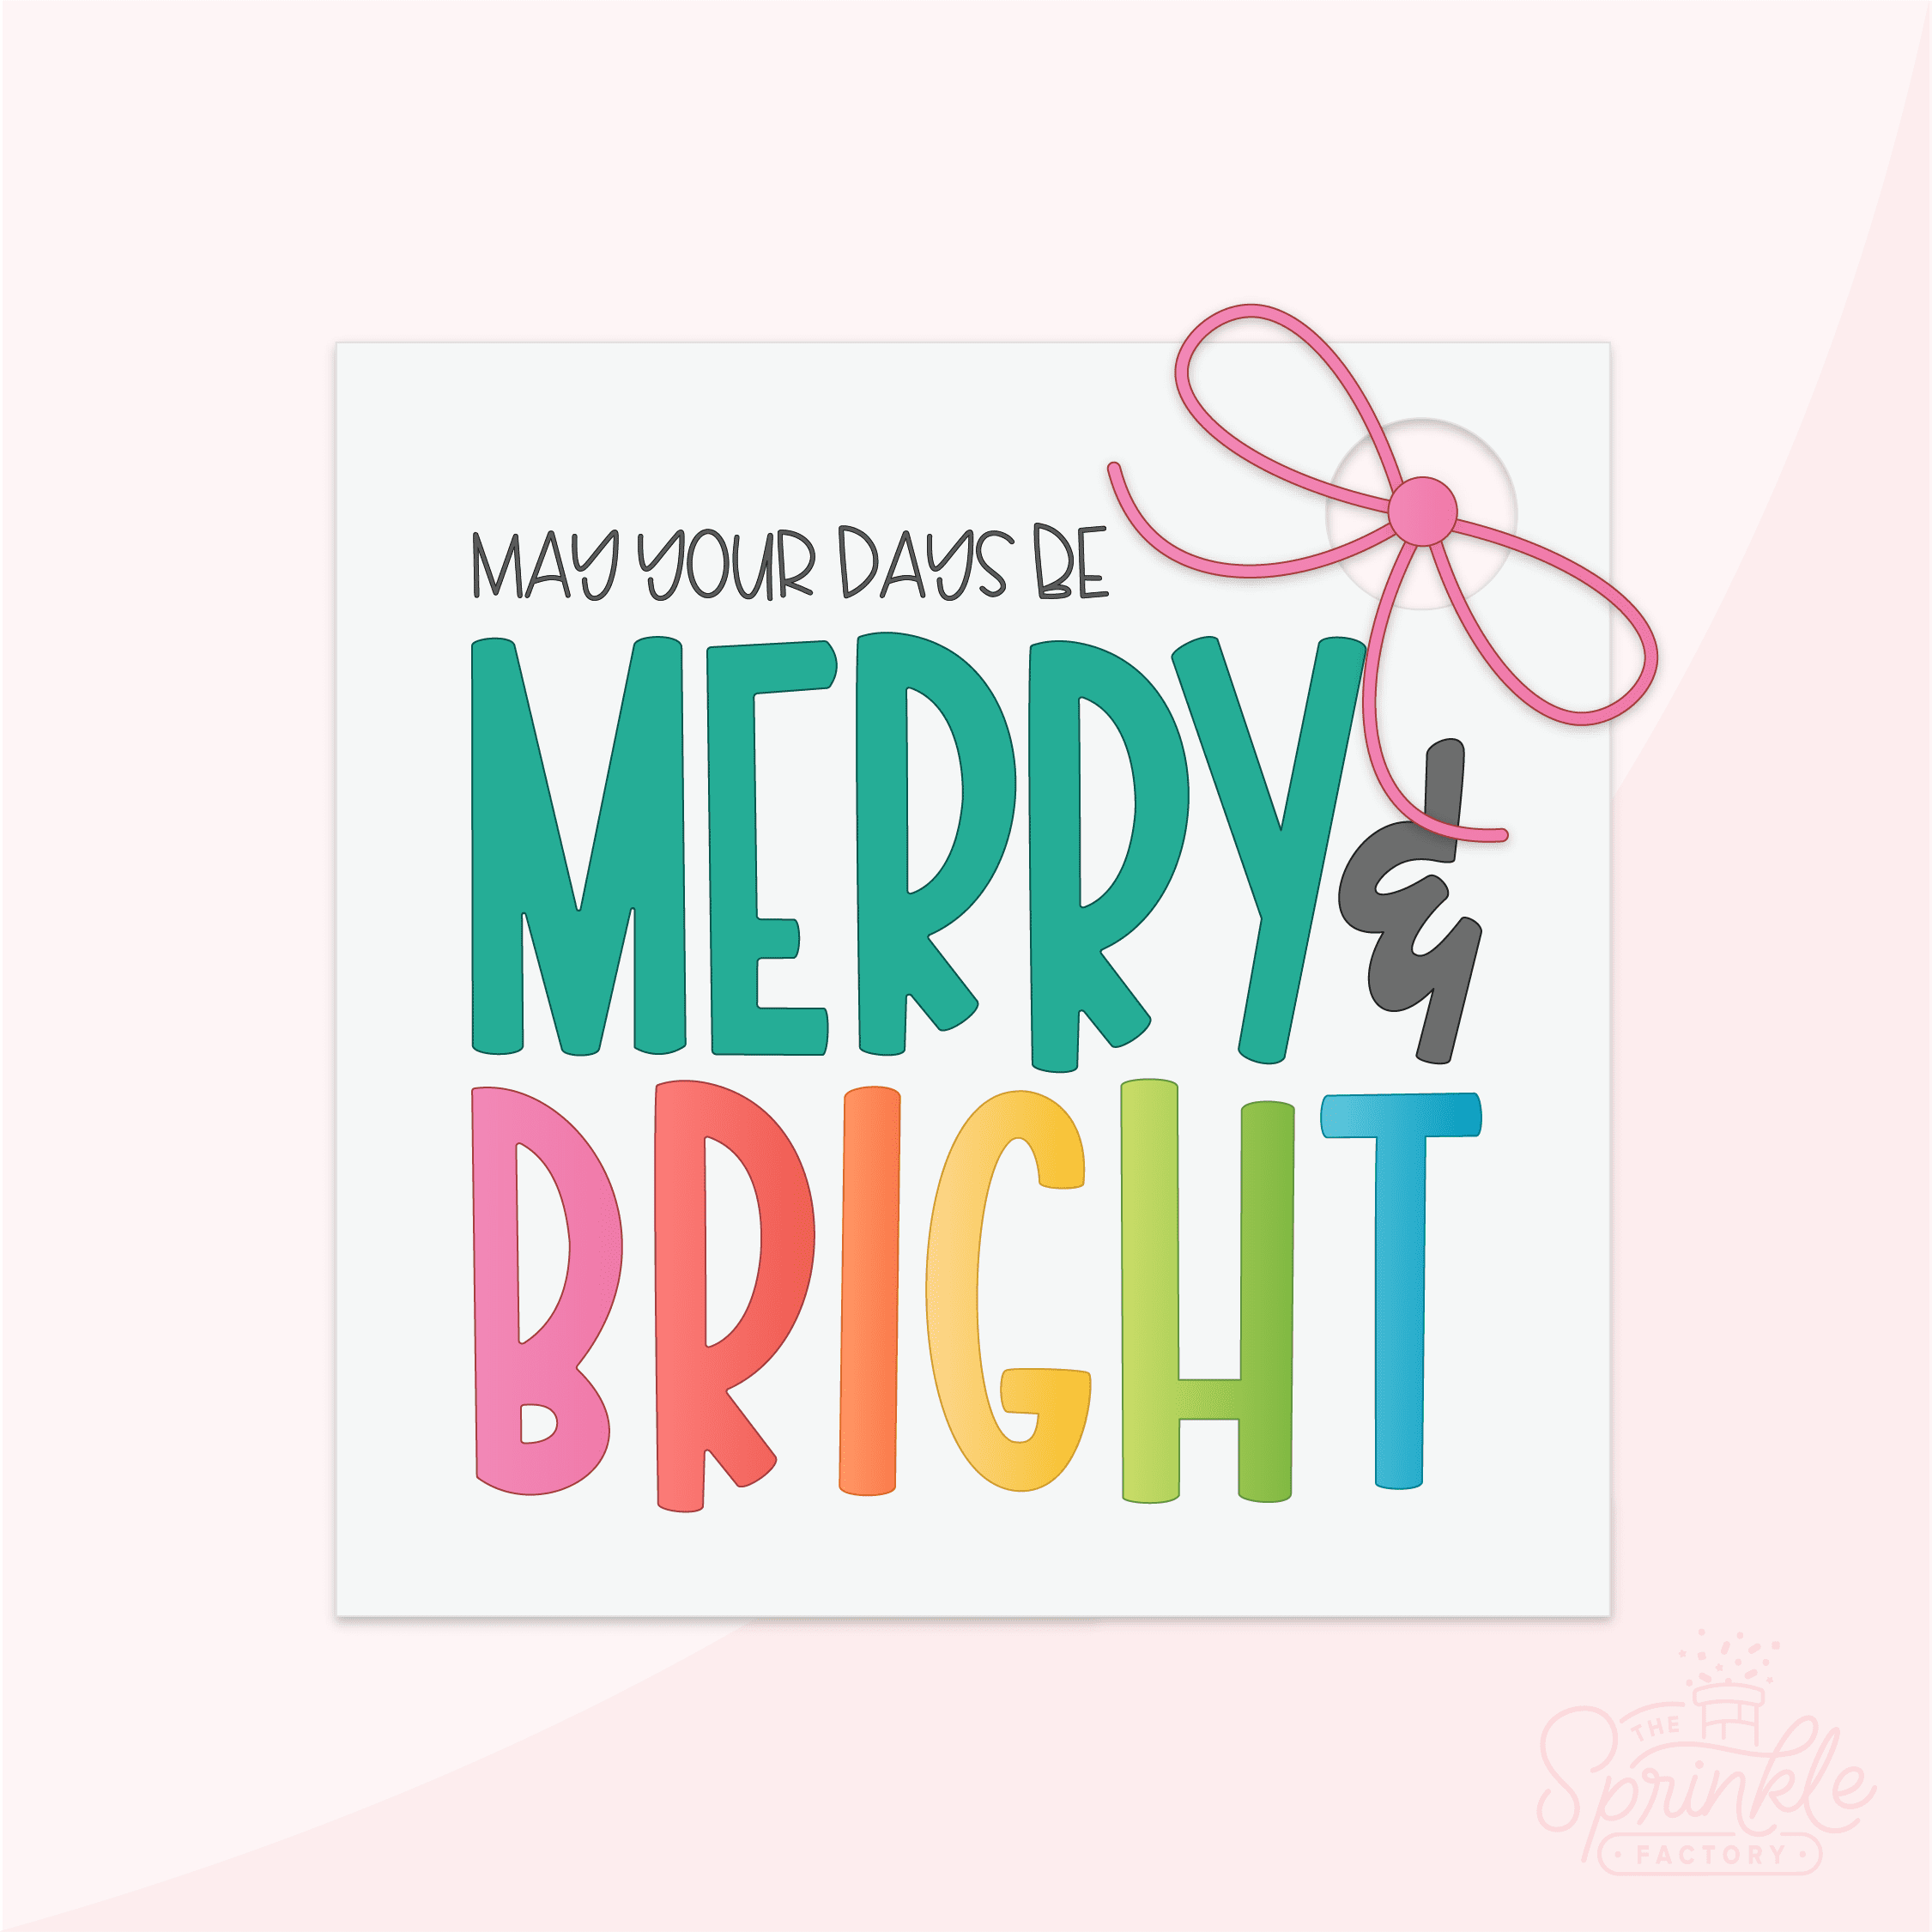 Image of a digital tag with the words may your days be merry and bright on it with a pink bow.